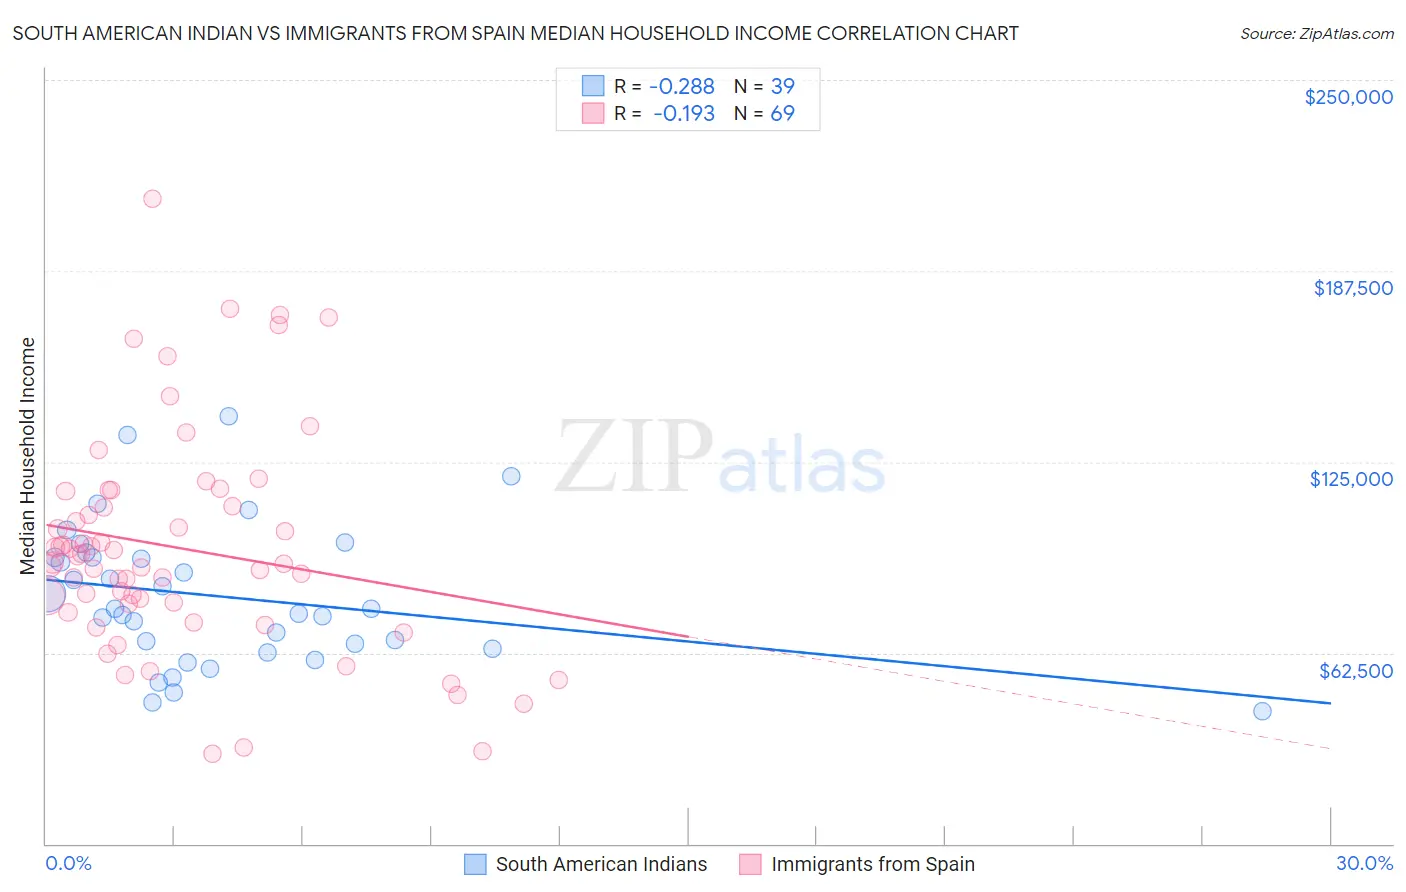 South American Indian vs Immigrants from Spain Median Household Income